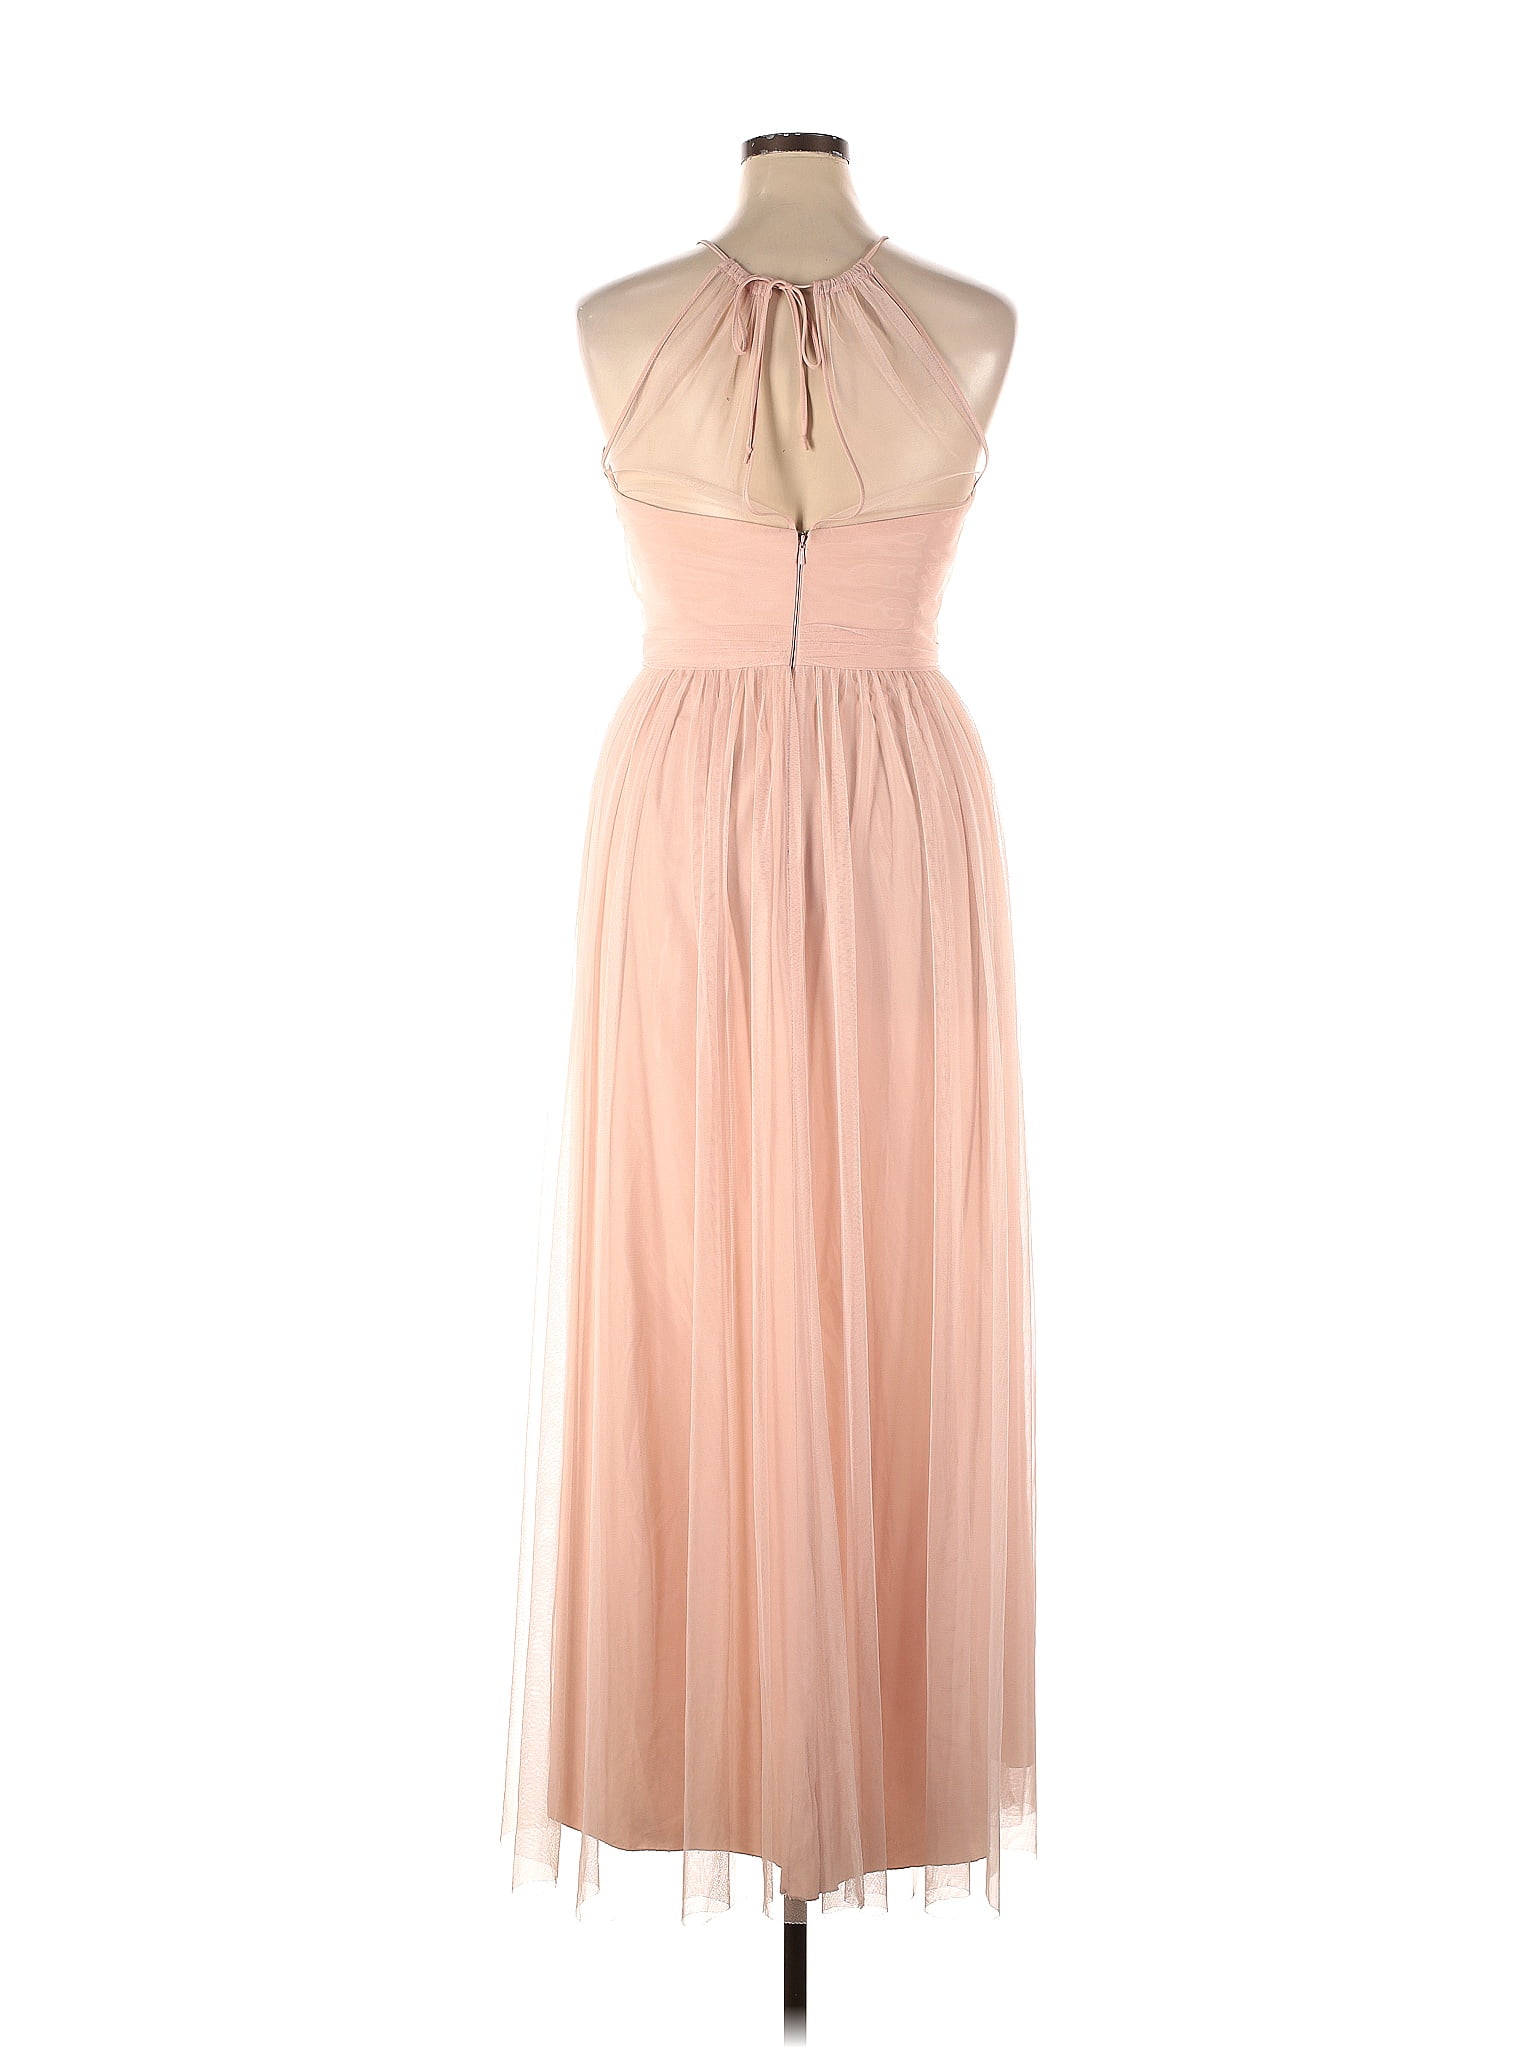 Amsale 100% Polyester Solid Tan Blush Aliki Gown Size 14 - 75% off